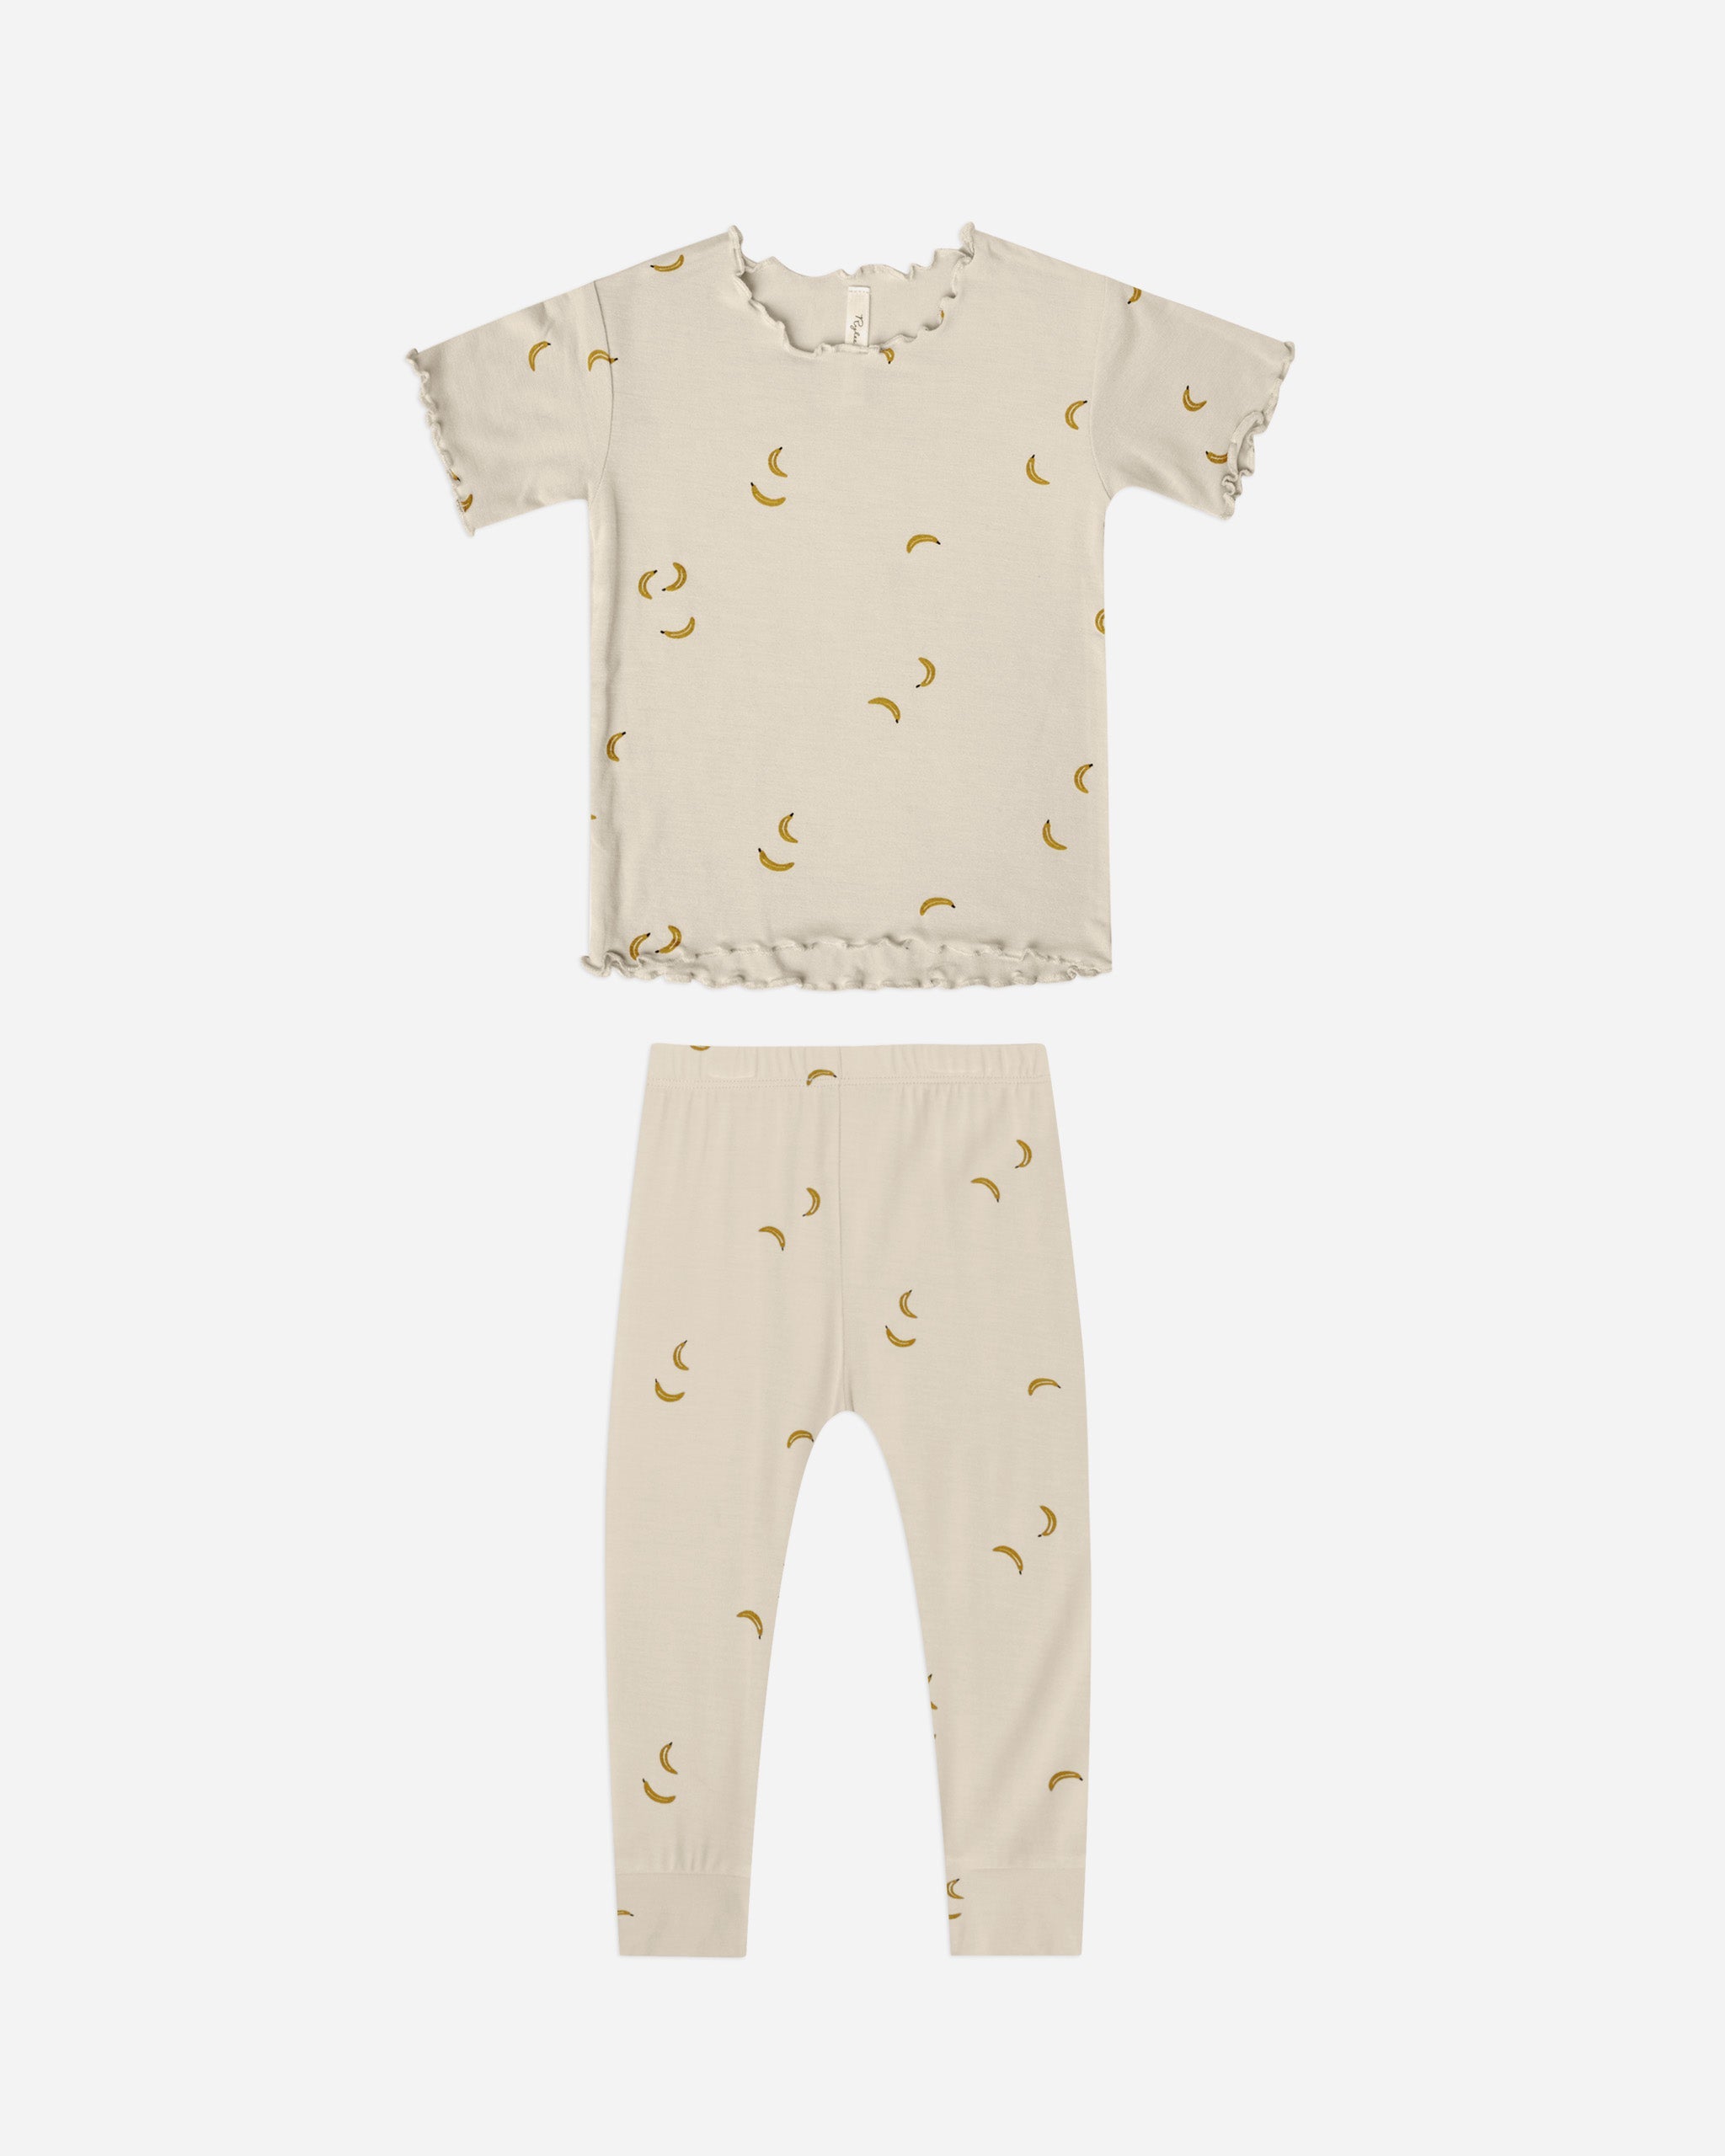 summer modal PJ set || bananas - Rylee + Cru | Kids Clothes | Trendy Baby Clothes | Modern Infant Outfits |